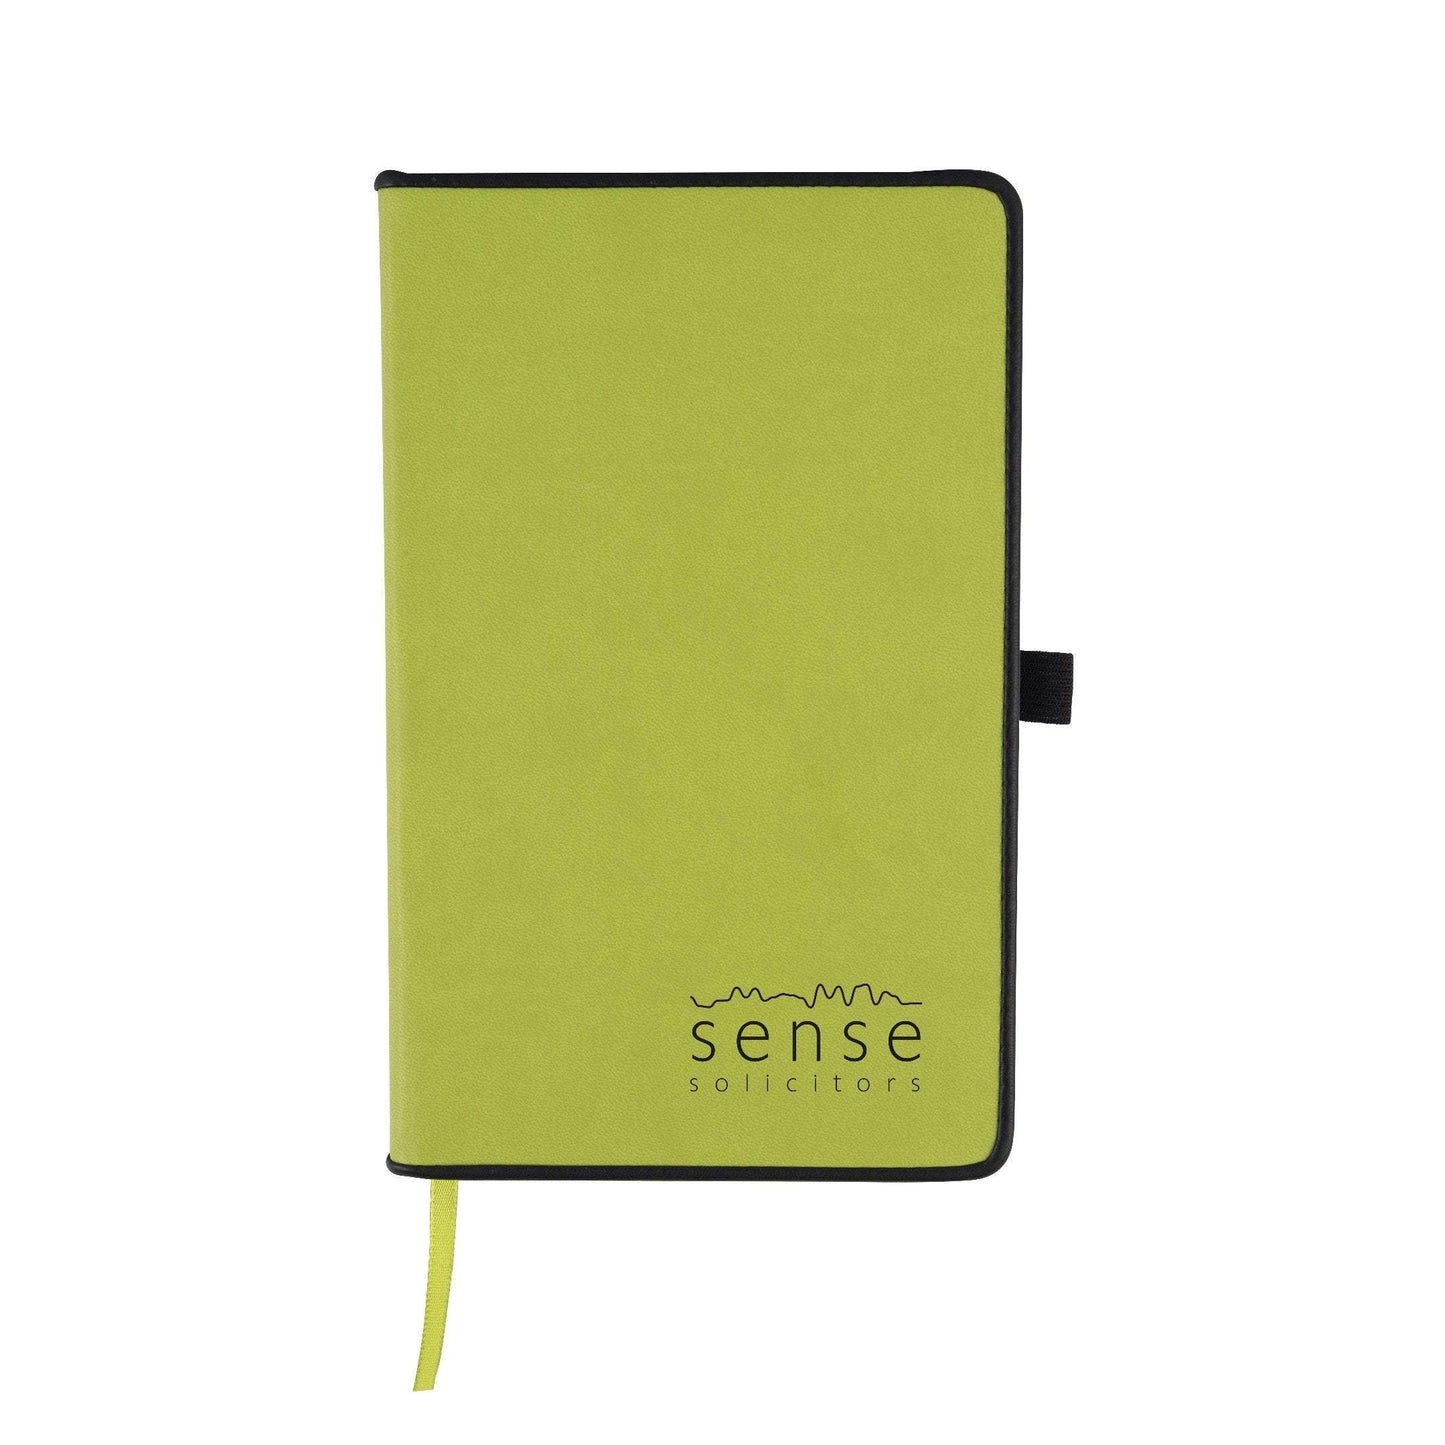 Border Notebook - Promotions Only Group Limited